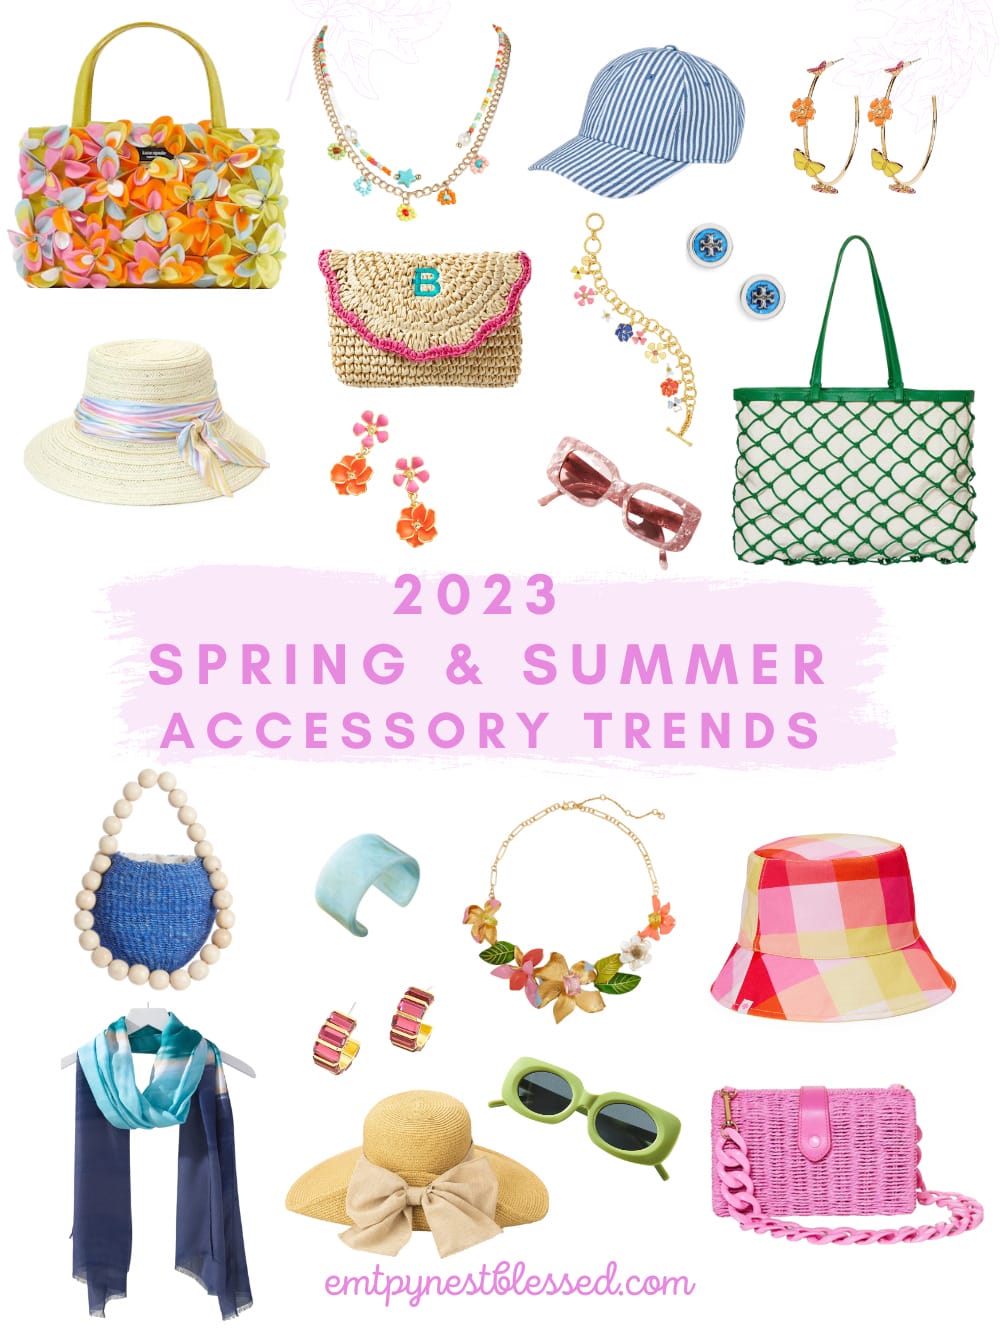 & Accessories — Styles to Know & Love